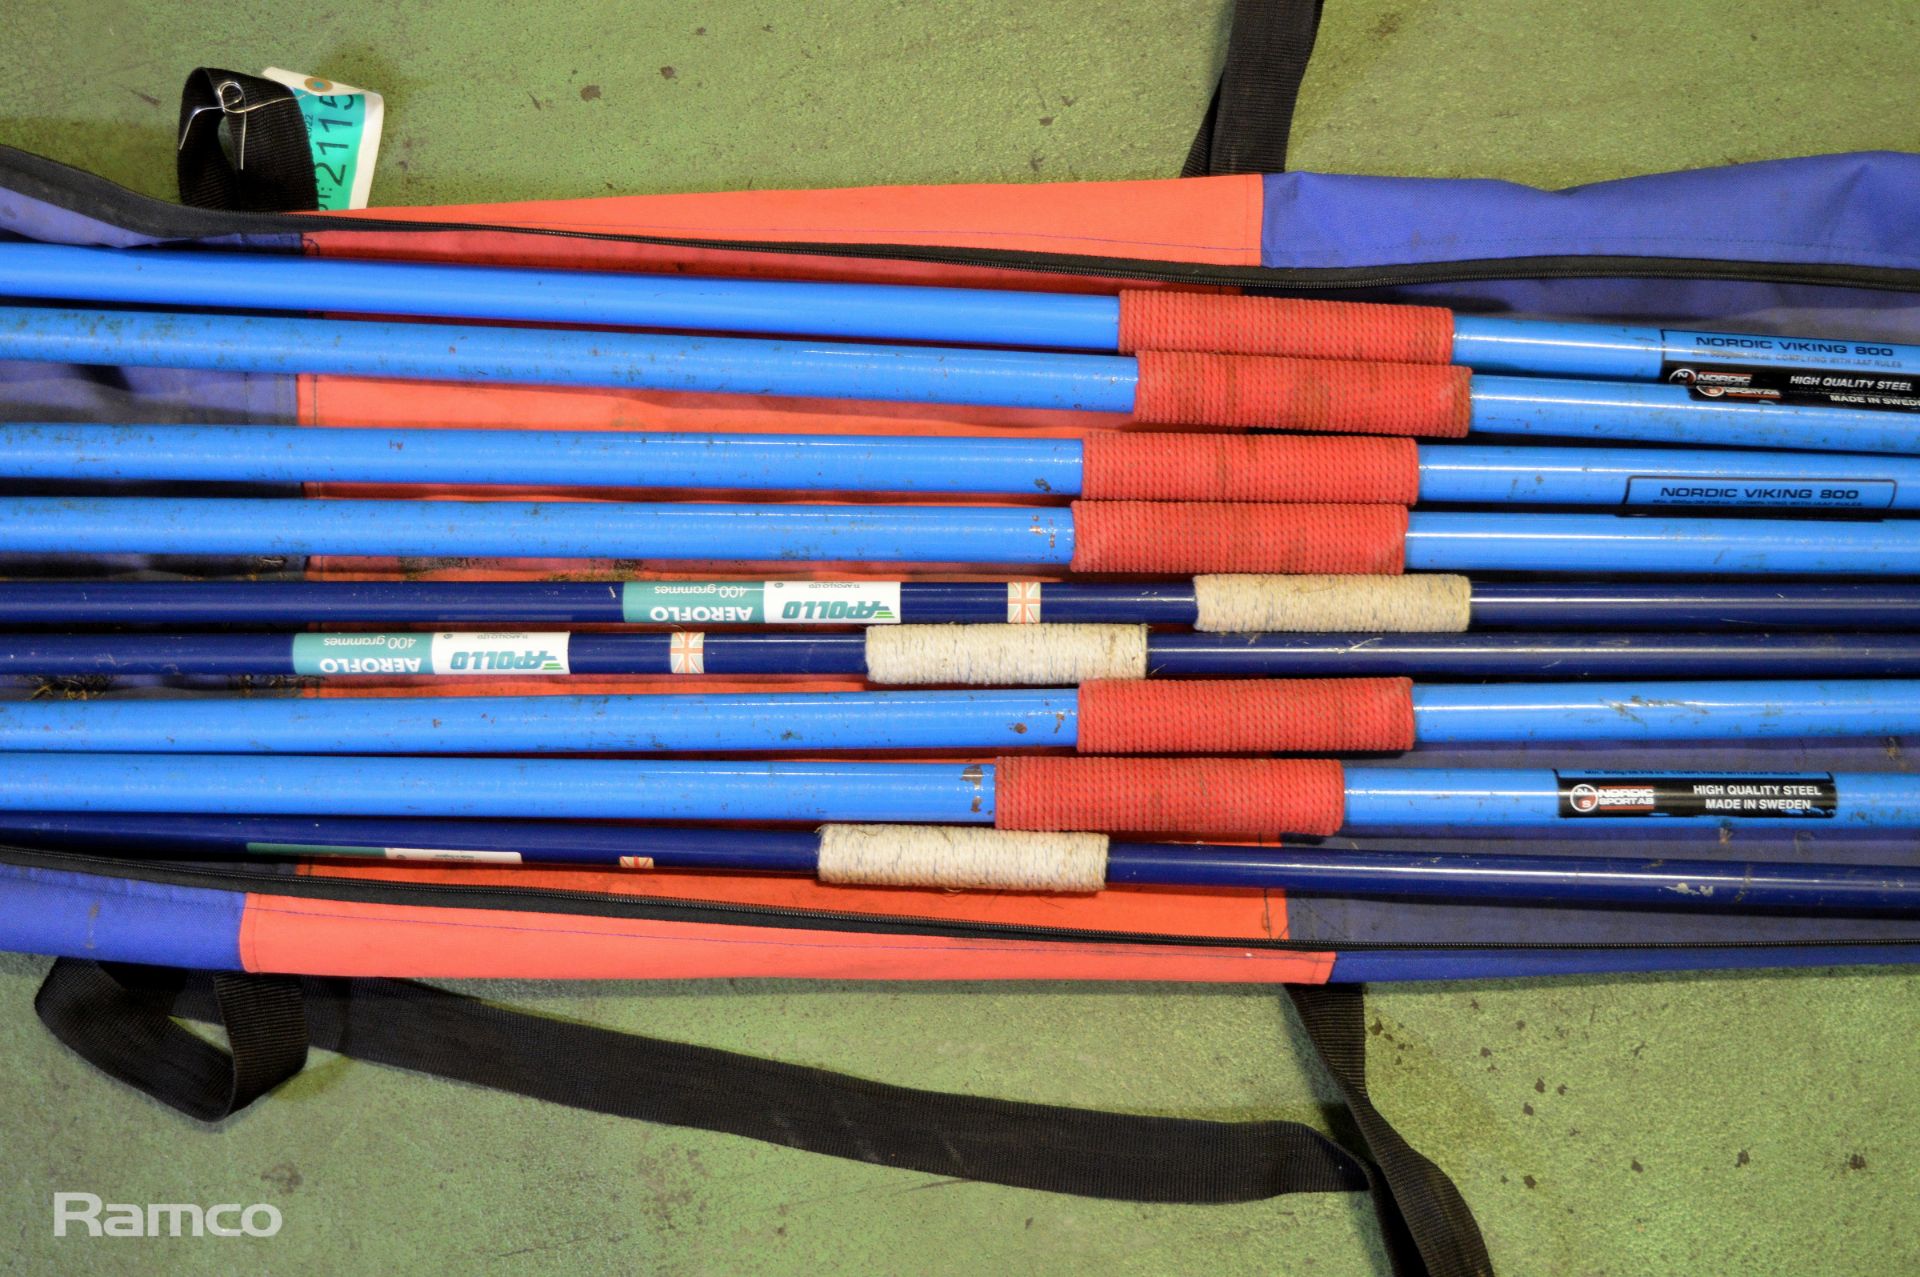 9x Various Aluminium Sports Javelins in carry Bag - Image 3 of 4